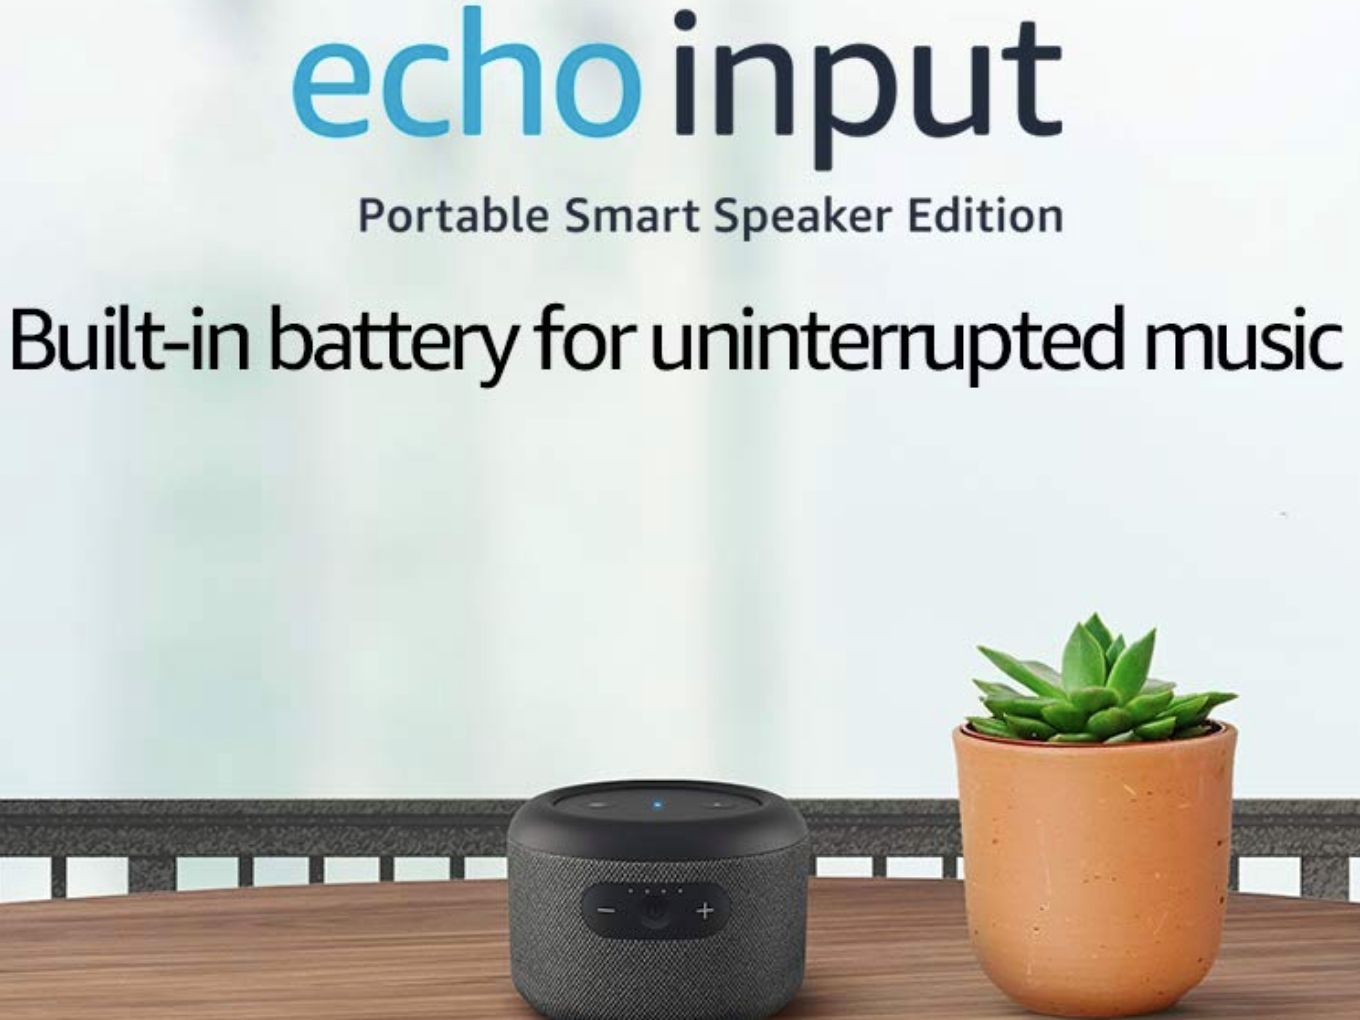 Amazon Introduces Portable Echo Input: Price, Features and More